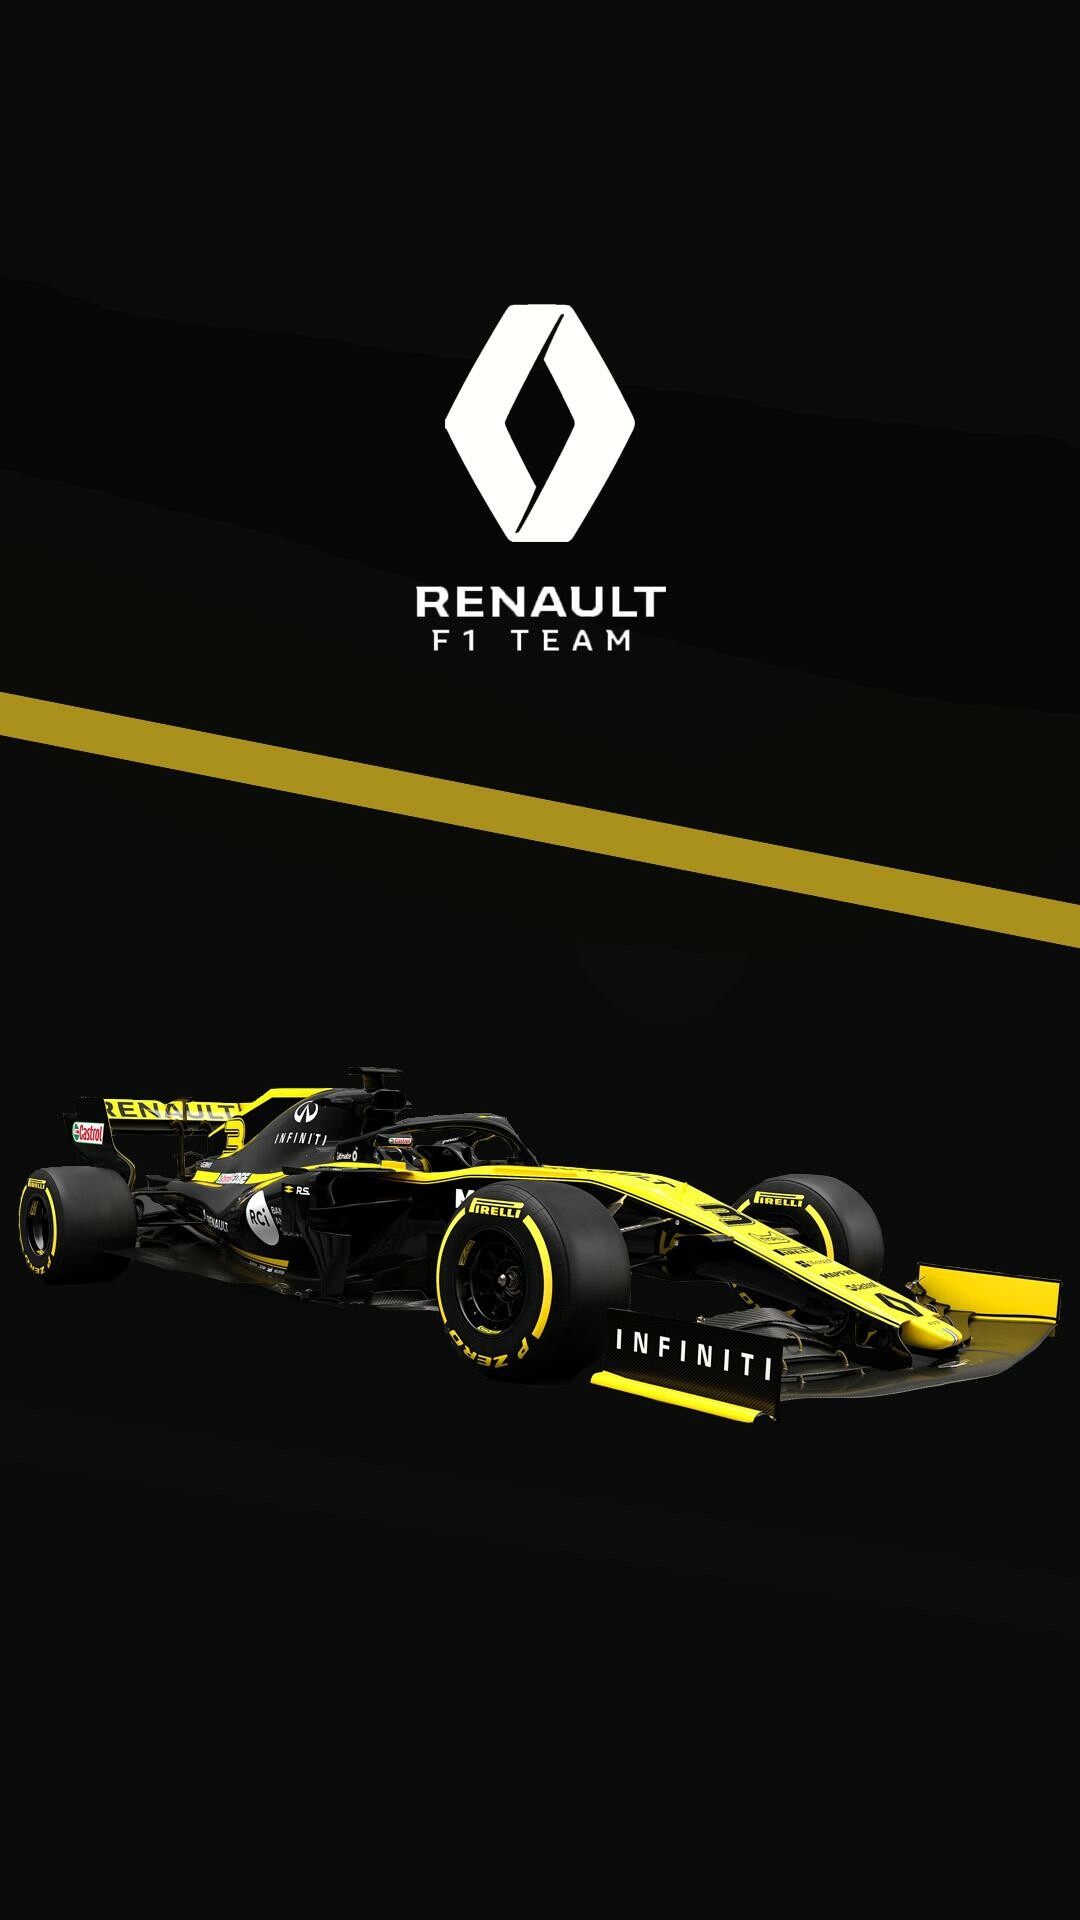 Renault: The motorsport, performance and special vehicles, Renault's Formula One program. 1080x1920 Full HD Wallpaper.